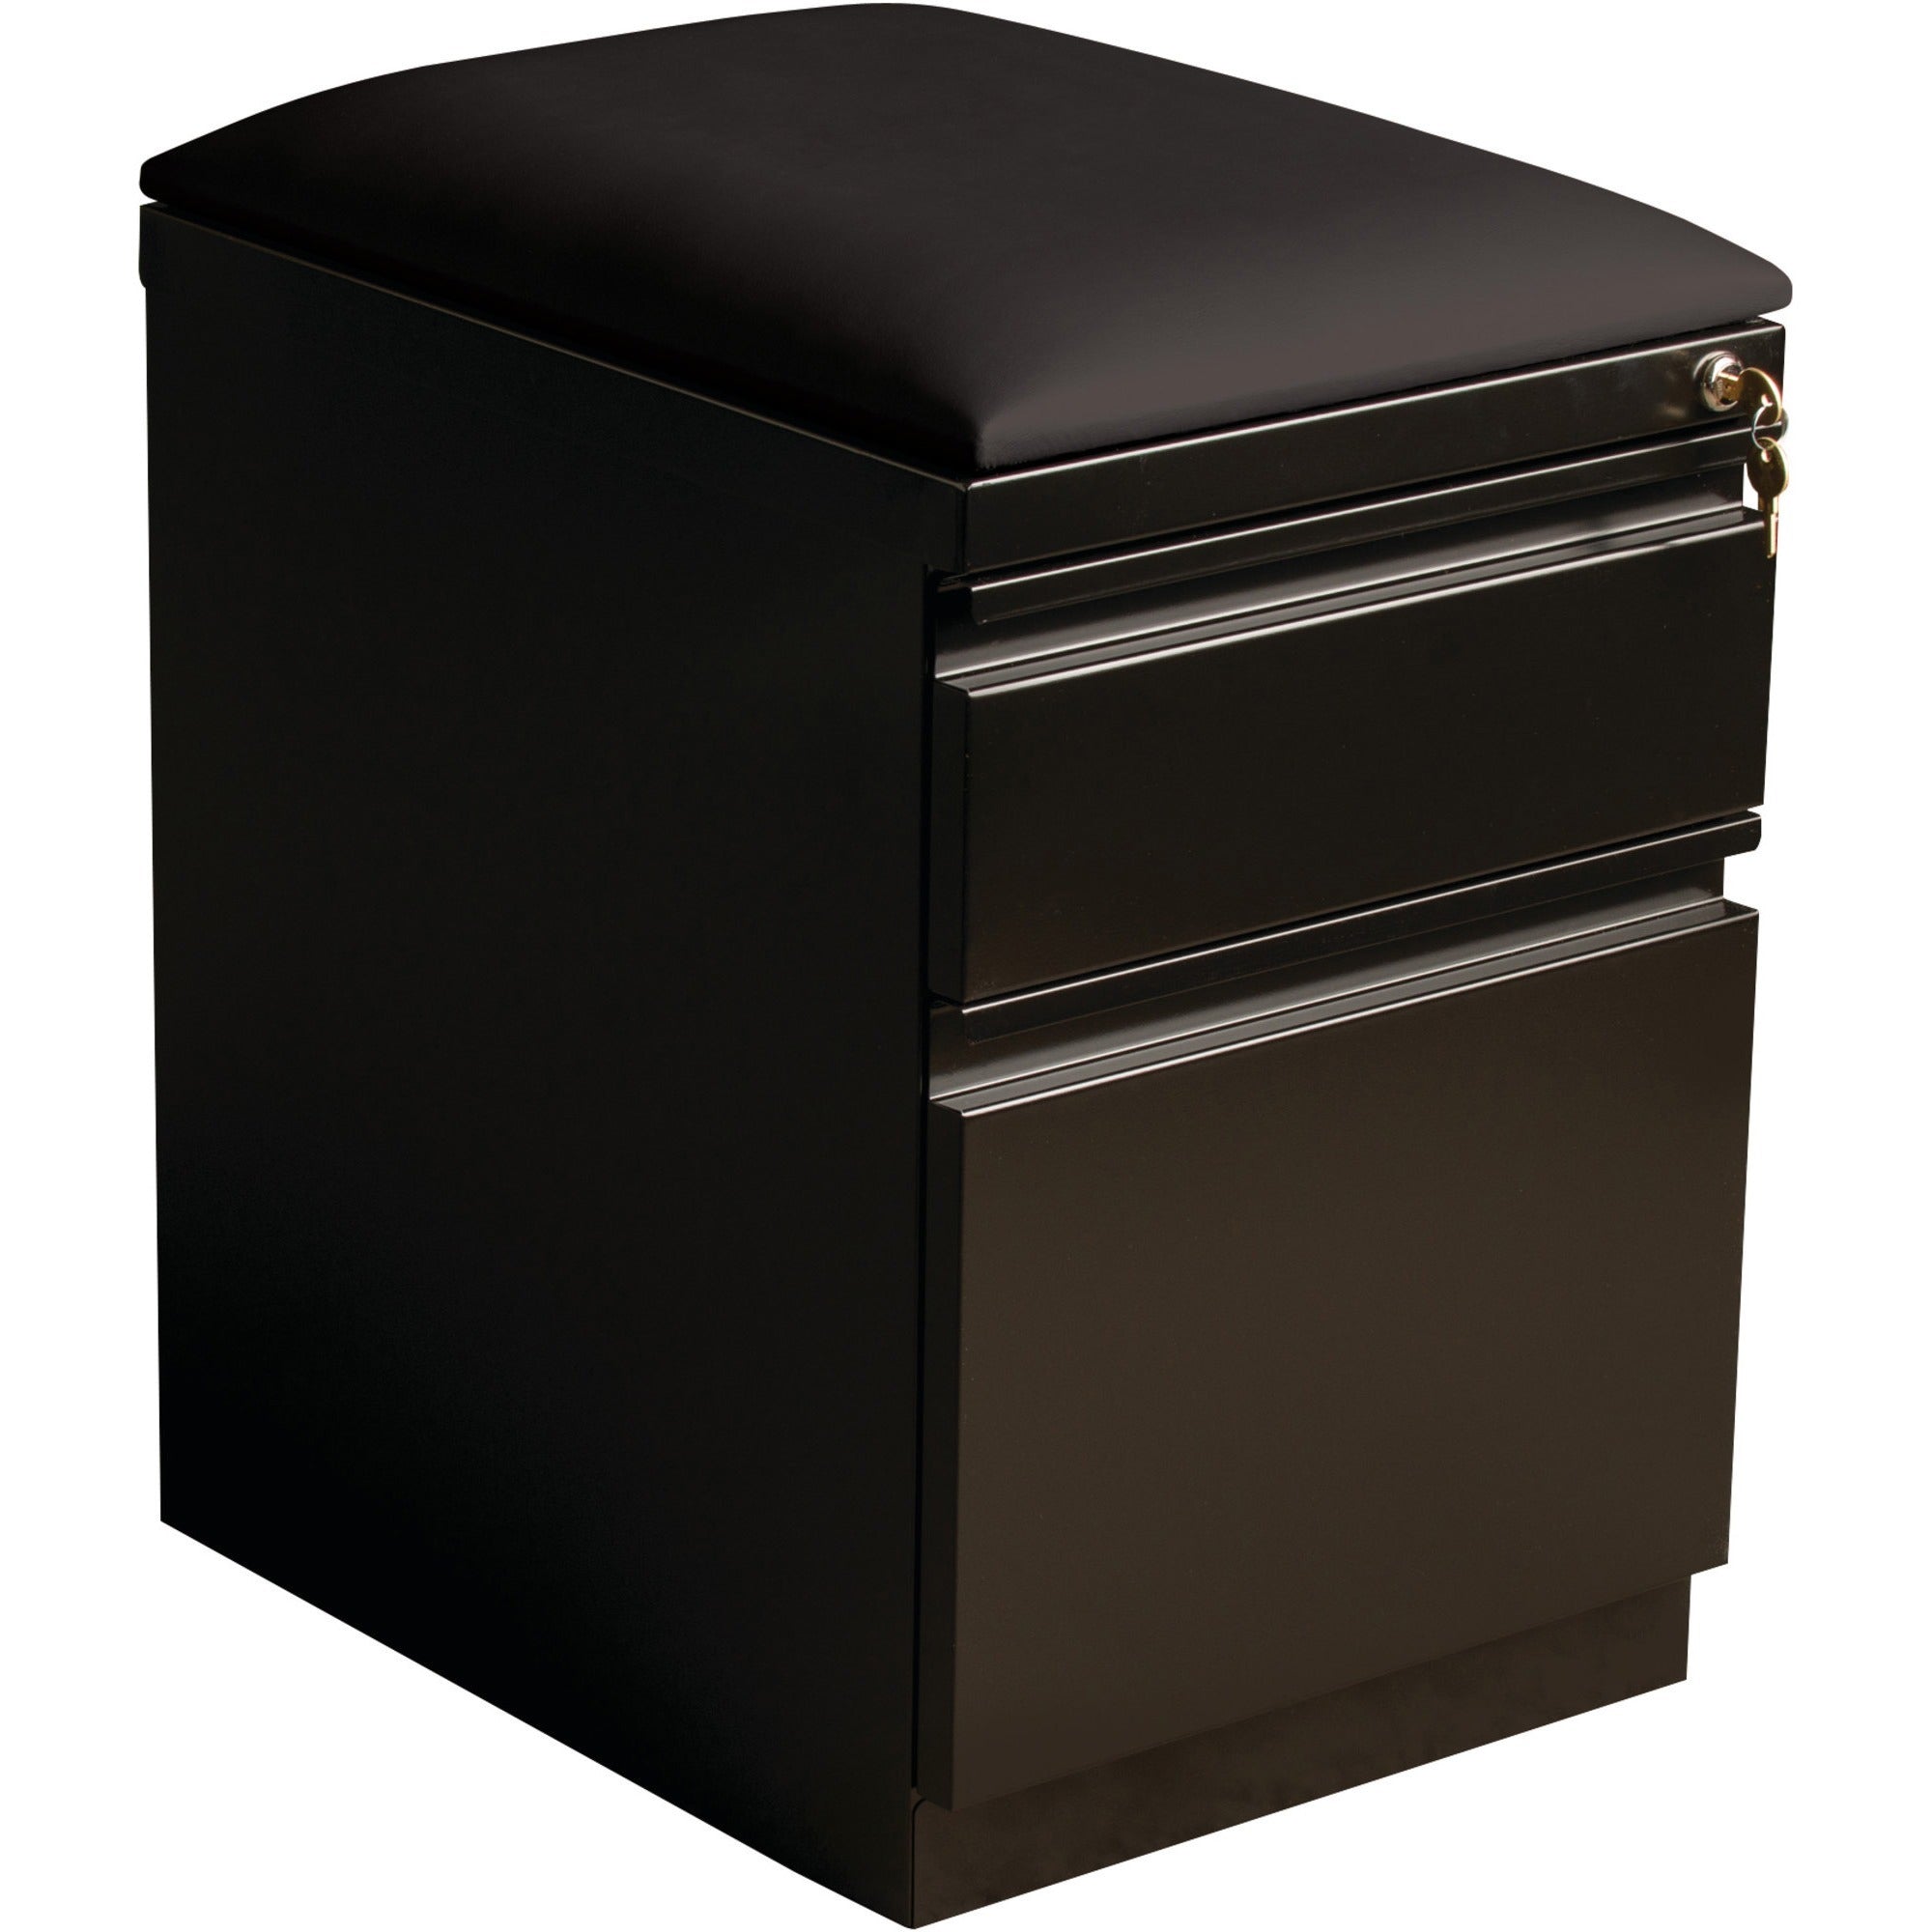 Lorell Mobile File Cabinet with Seat Cushion Top - 15" x 19.9" x 23.8" - 2 x Drawer(s) for Box, File - Letter - 305.50 lb Load Capacity - Ball-bearing Suspension, Drawer Extension - Black - Steel - Recycled - 